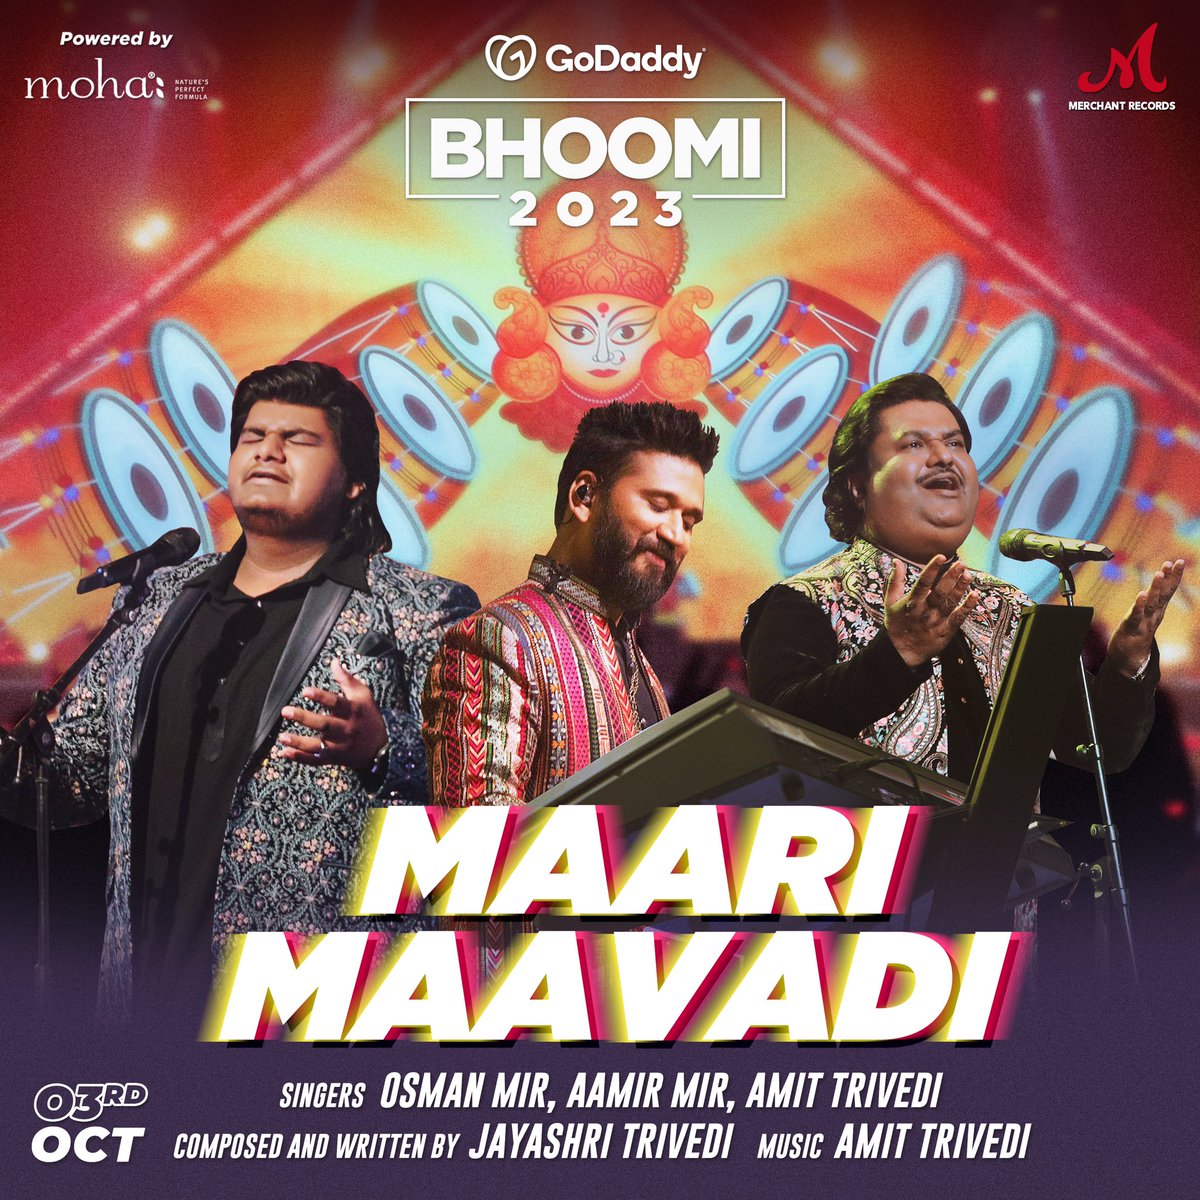 '🎶 Get ready to groove this Navratri with #MaariMavadi 🙏💫 by @ItsAmitTrivedi from #Bhoomi2023 by @SalimSulaiman! Mark your calendars for #3rdOct – it's going to be epic! 💃🕺

Presented by @GoDaddy_India and powered by @themohalife 

#merchantrecords #salimsuliman